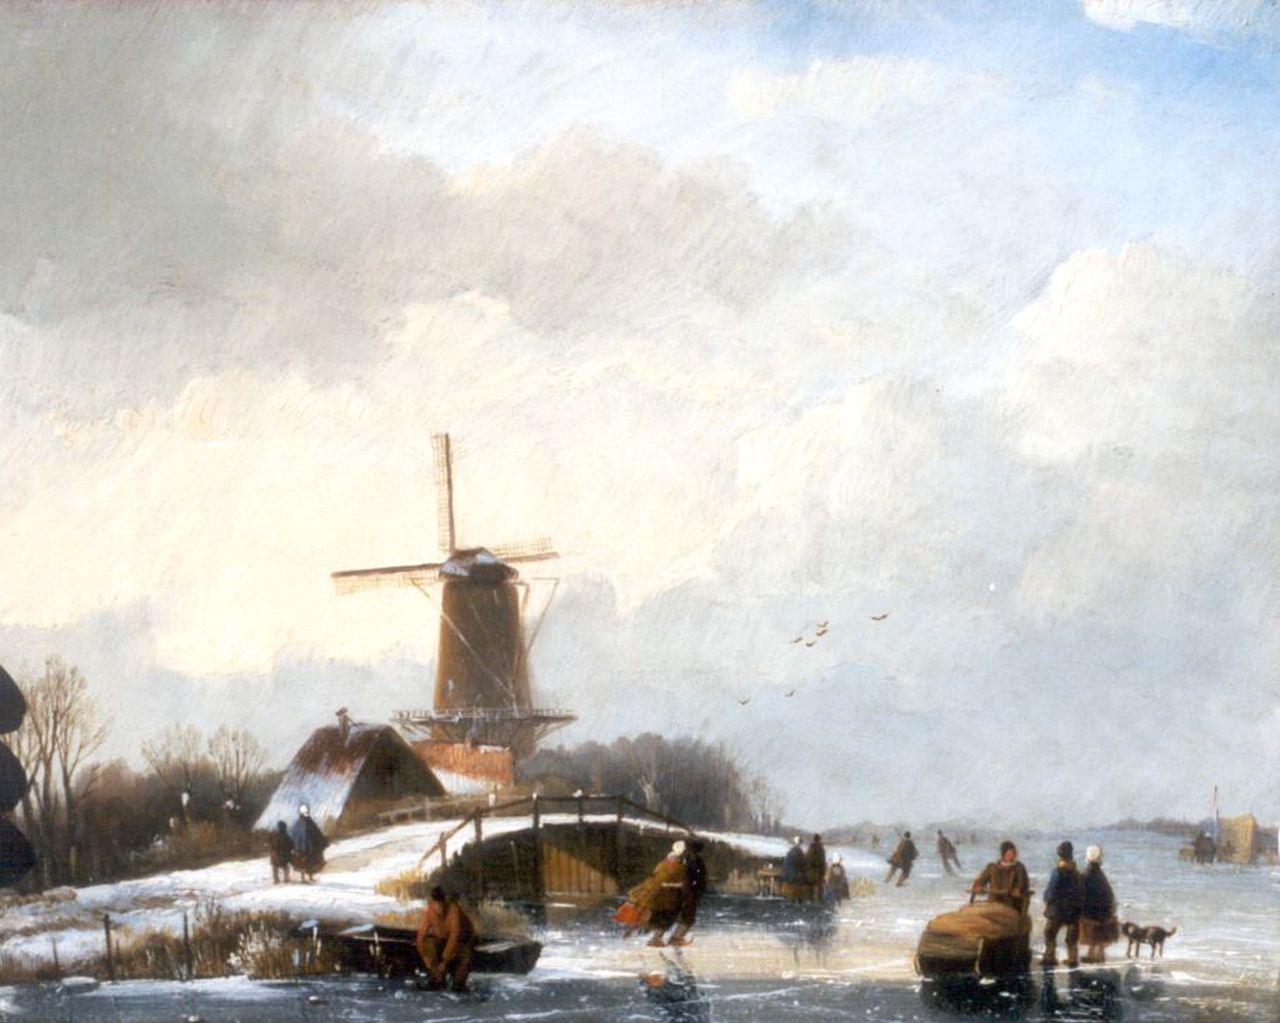 Spohler J.J.  | Jan Jacob Spohler, A winter landscape with skaters by a windmill, oil on panel 20.1 x 25.0 cm, signed l.l. and painted between 1830-1840